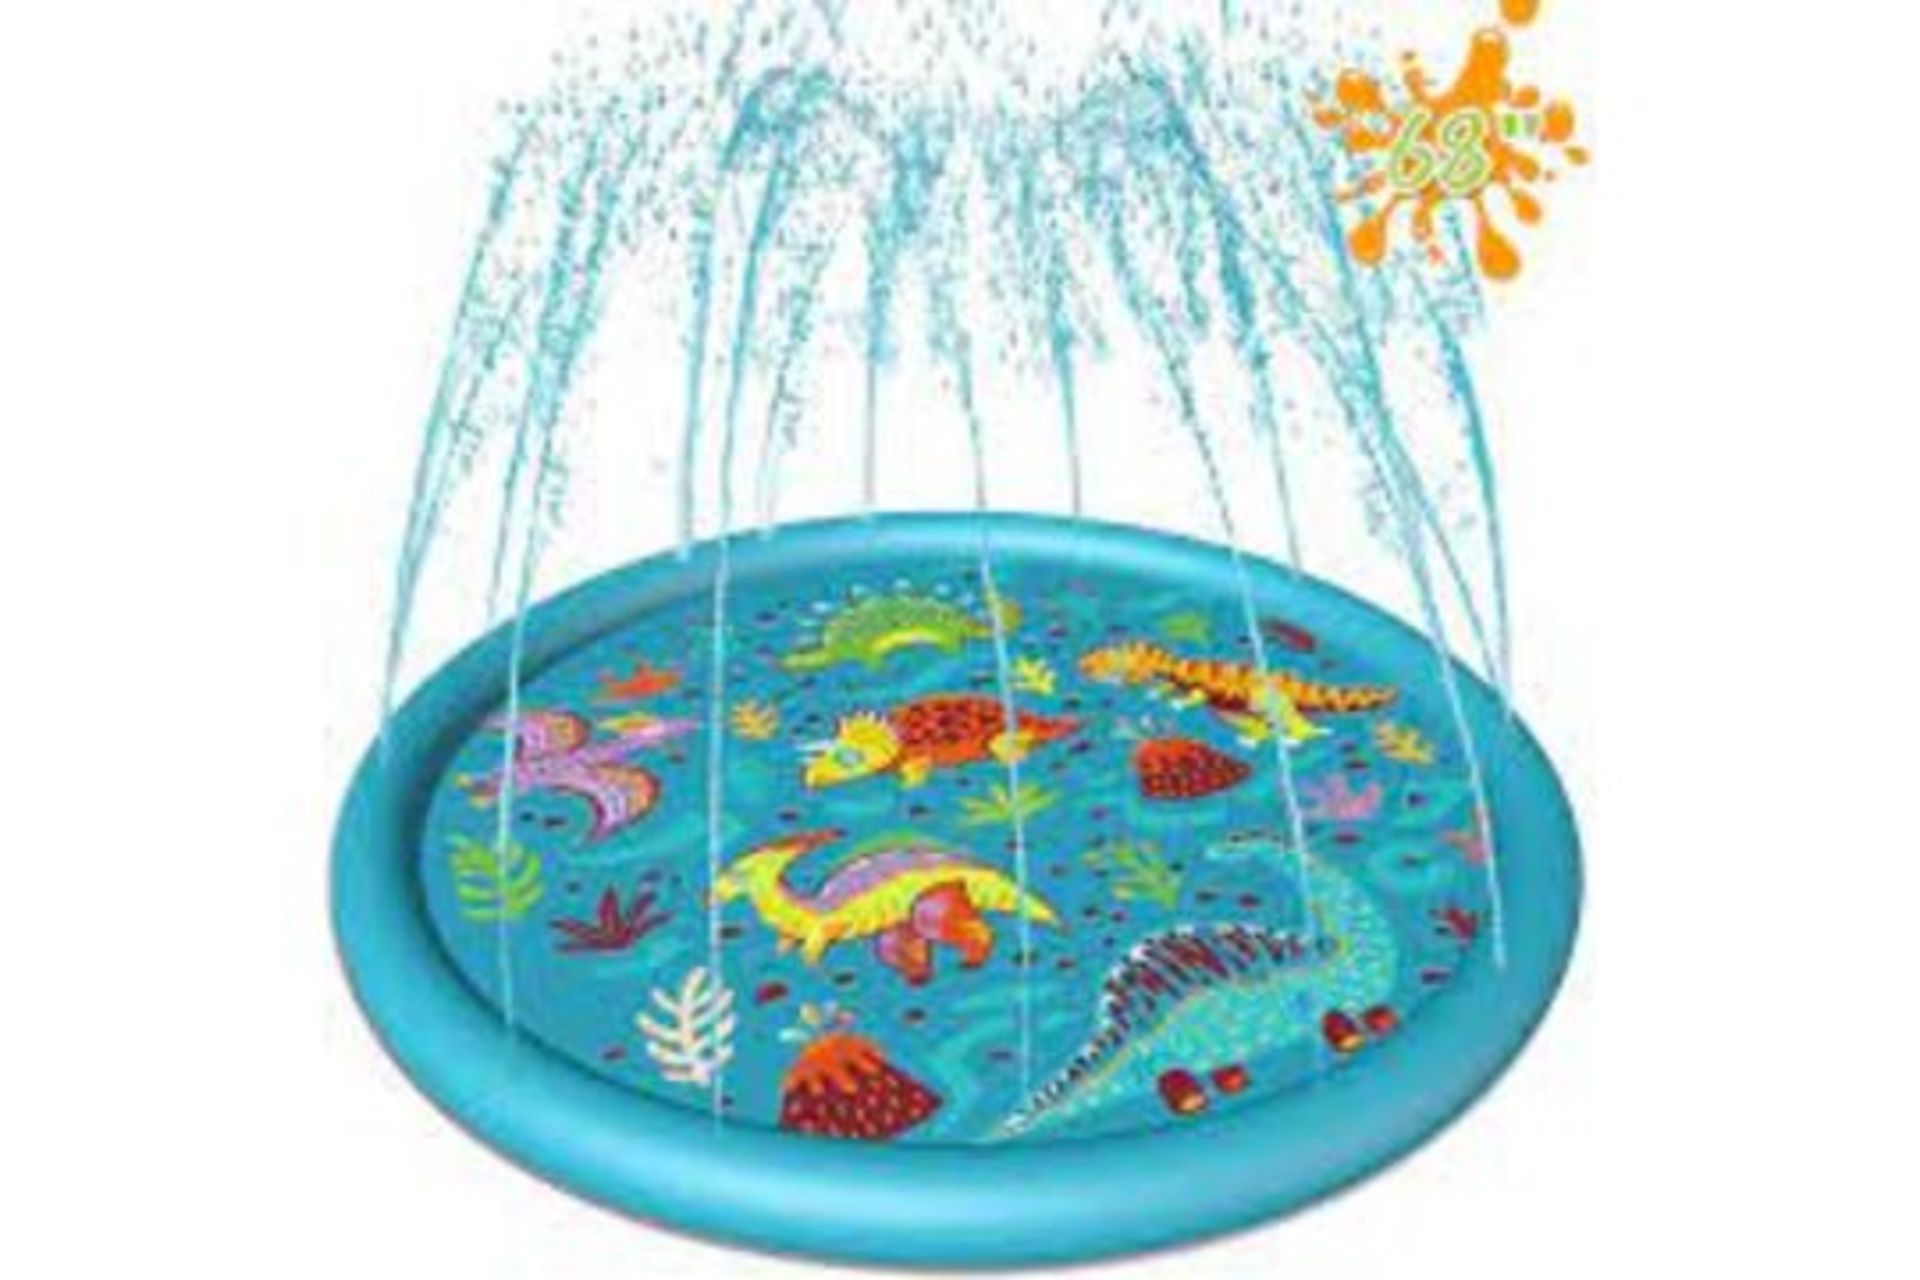 4 X NEW BOXED LUKAT SPLASH PAD PADDLING POOL. EASY SET UP - CONNECT N GO! (ROW9)